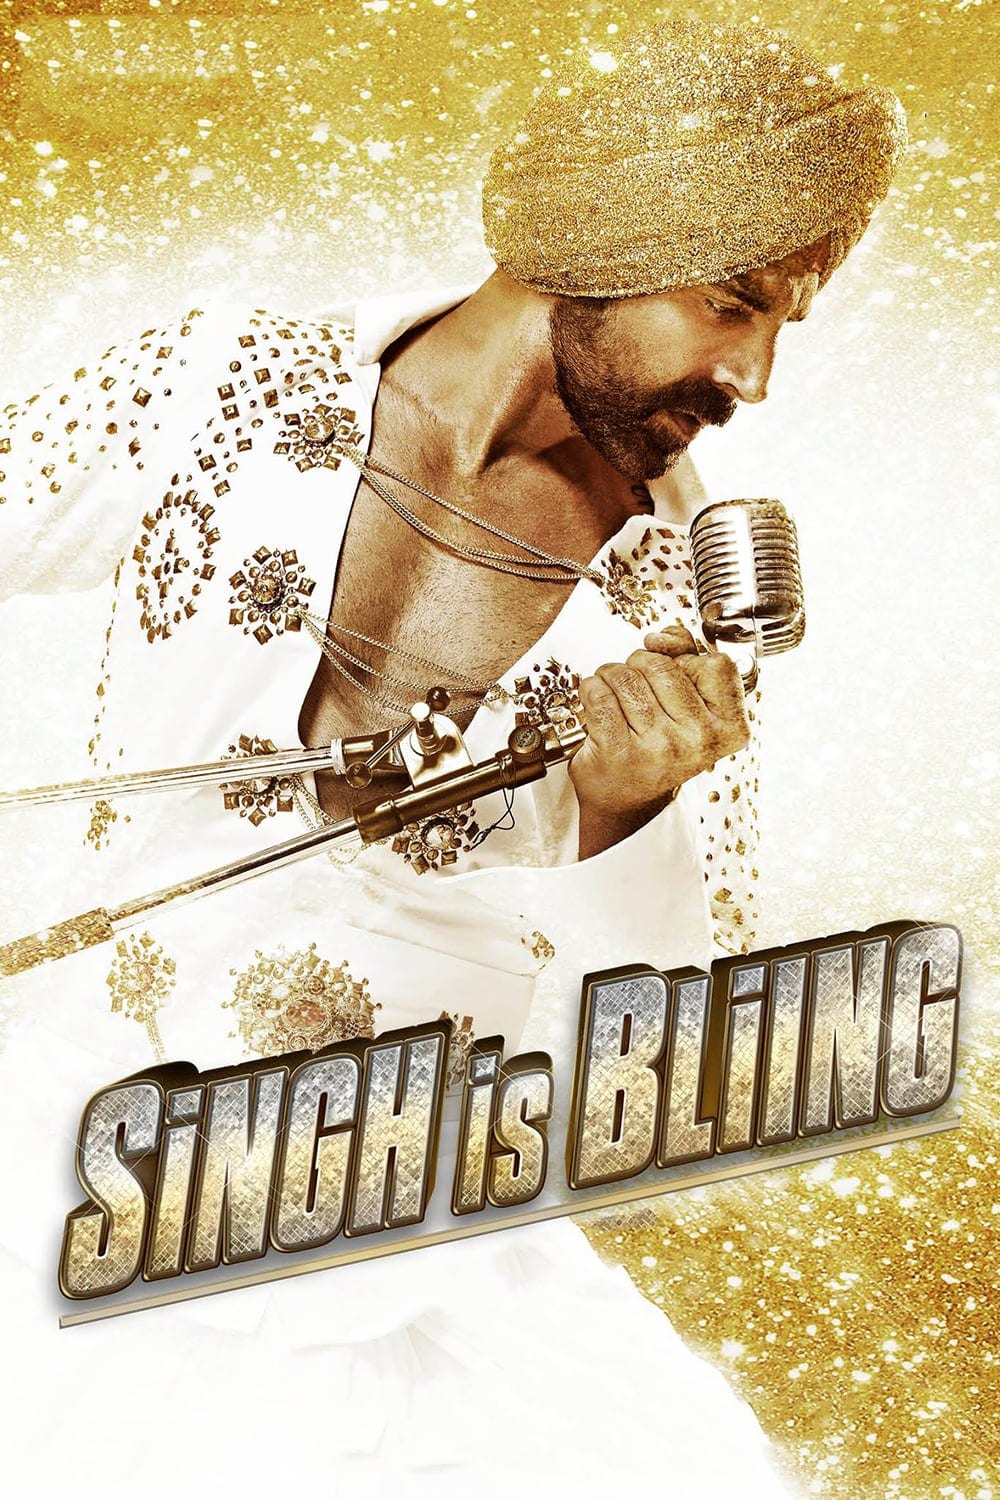 Poster for the movie "Singh Is Bliing"